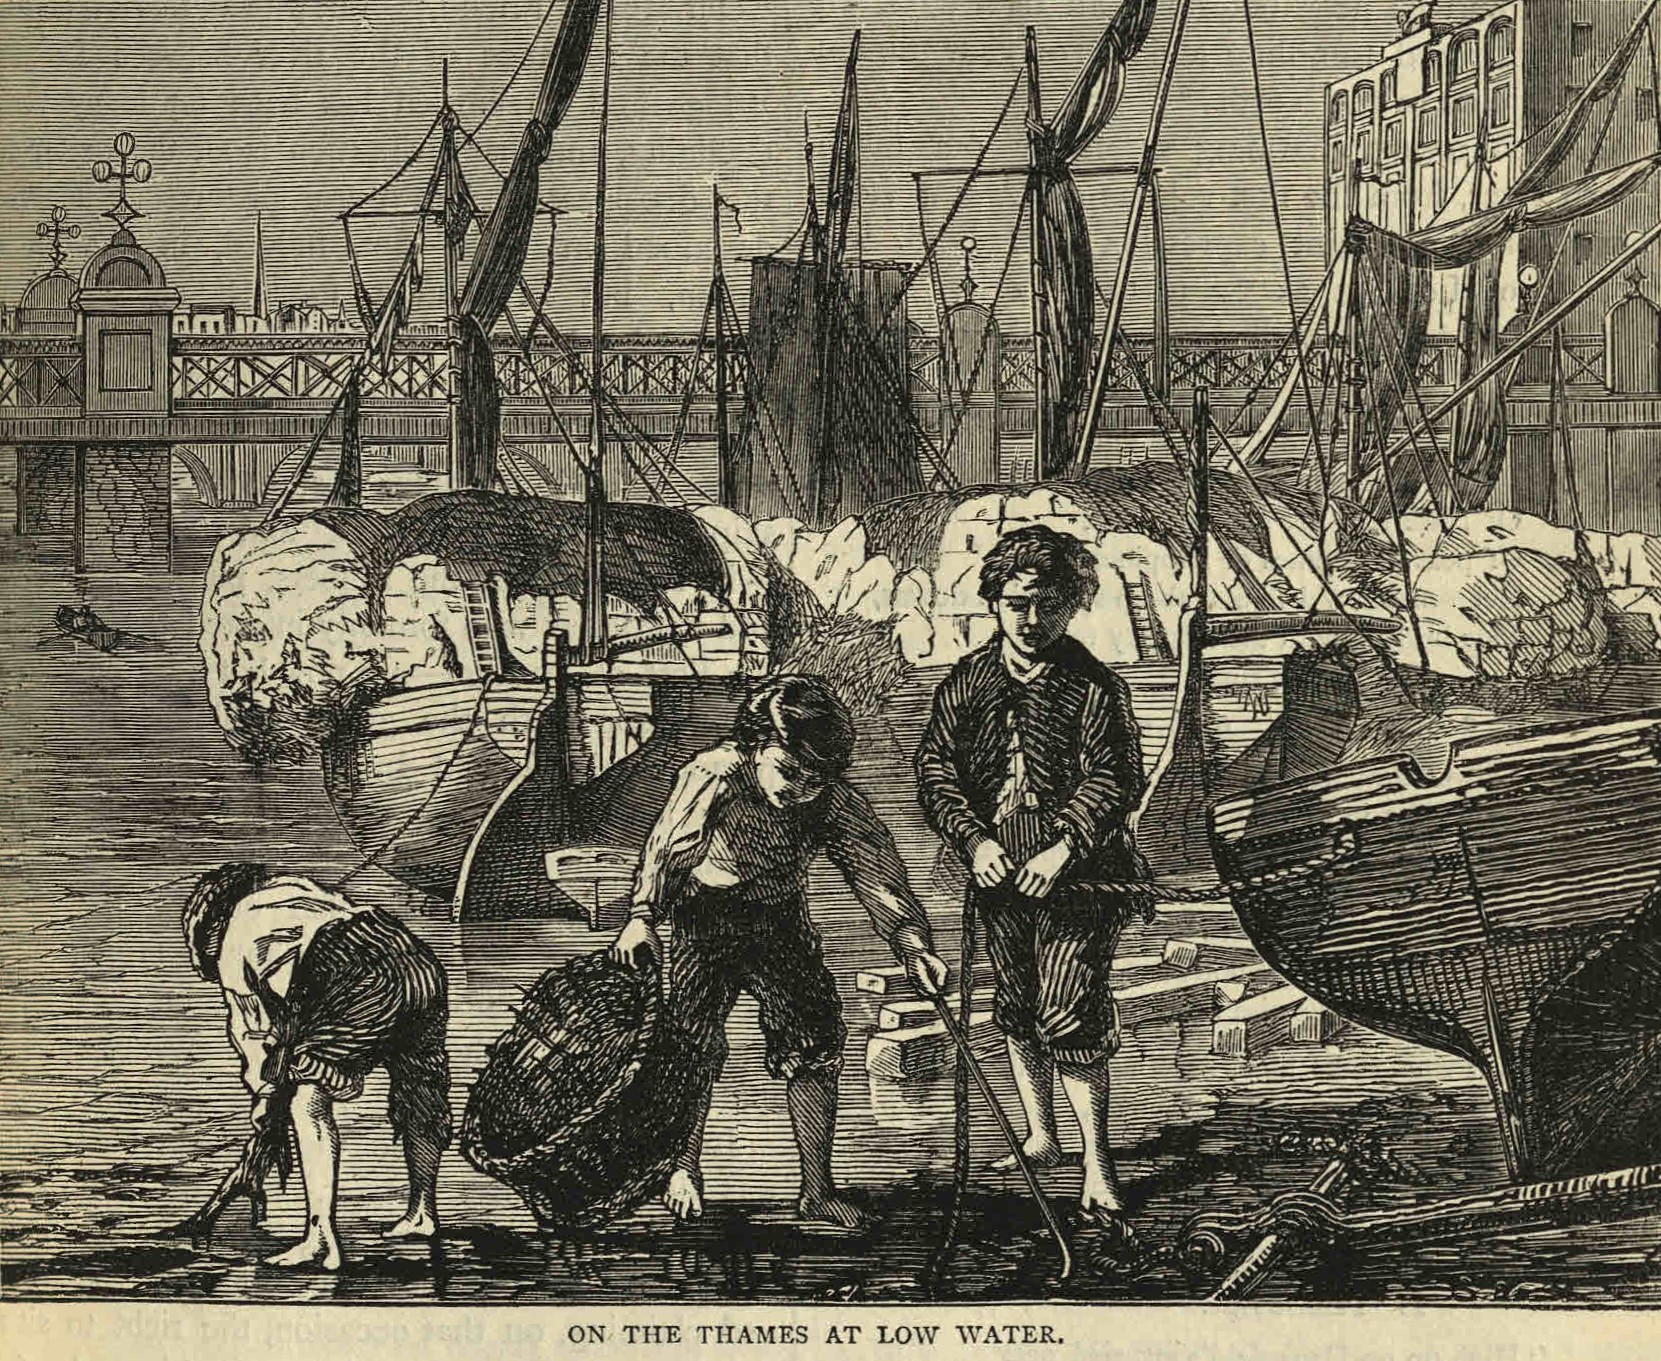 On the Thames at low water, from 'Old and New London', vol.3, [1878?]